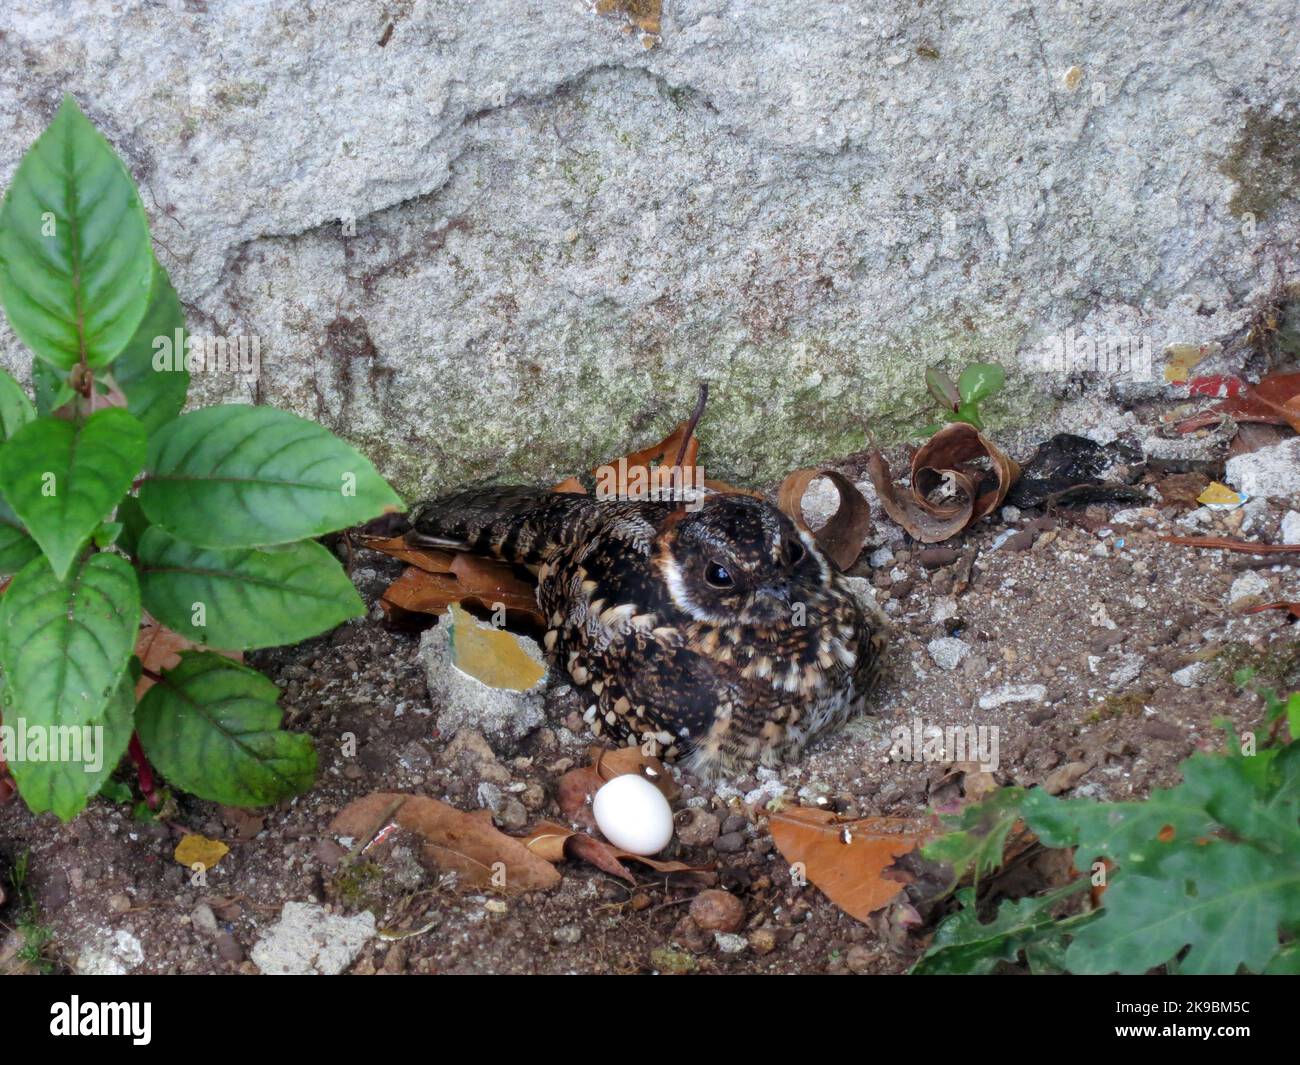 Band-winged Nightjar (Systellura longiro) nesting in front of a lodge in Rio Blanco reserve, central Andes valley in Colombia. Female sitting next to Stock Photo